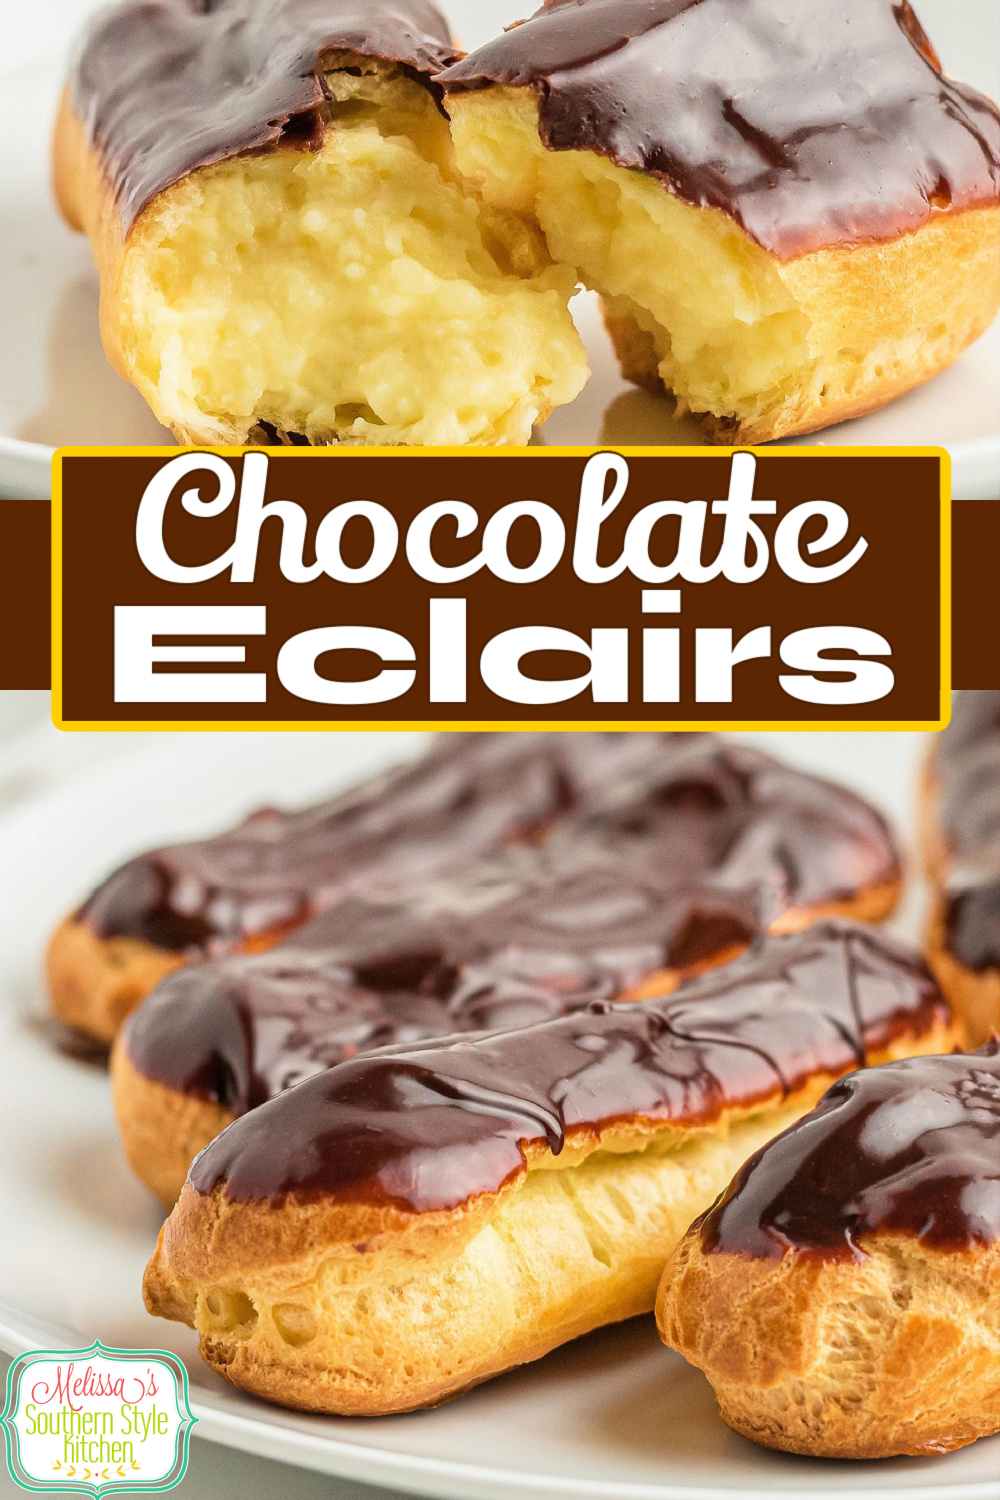 You're sure to impress your family and friends with these scrumptious Chocolate Eclairs filled with homemade pastry cream #chocolateeclairs #eclairs #eclairsrecipes #pateachoux #chouxdough #pastries #desserts #southernrecipes #chocolate via @melissasssk